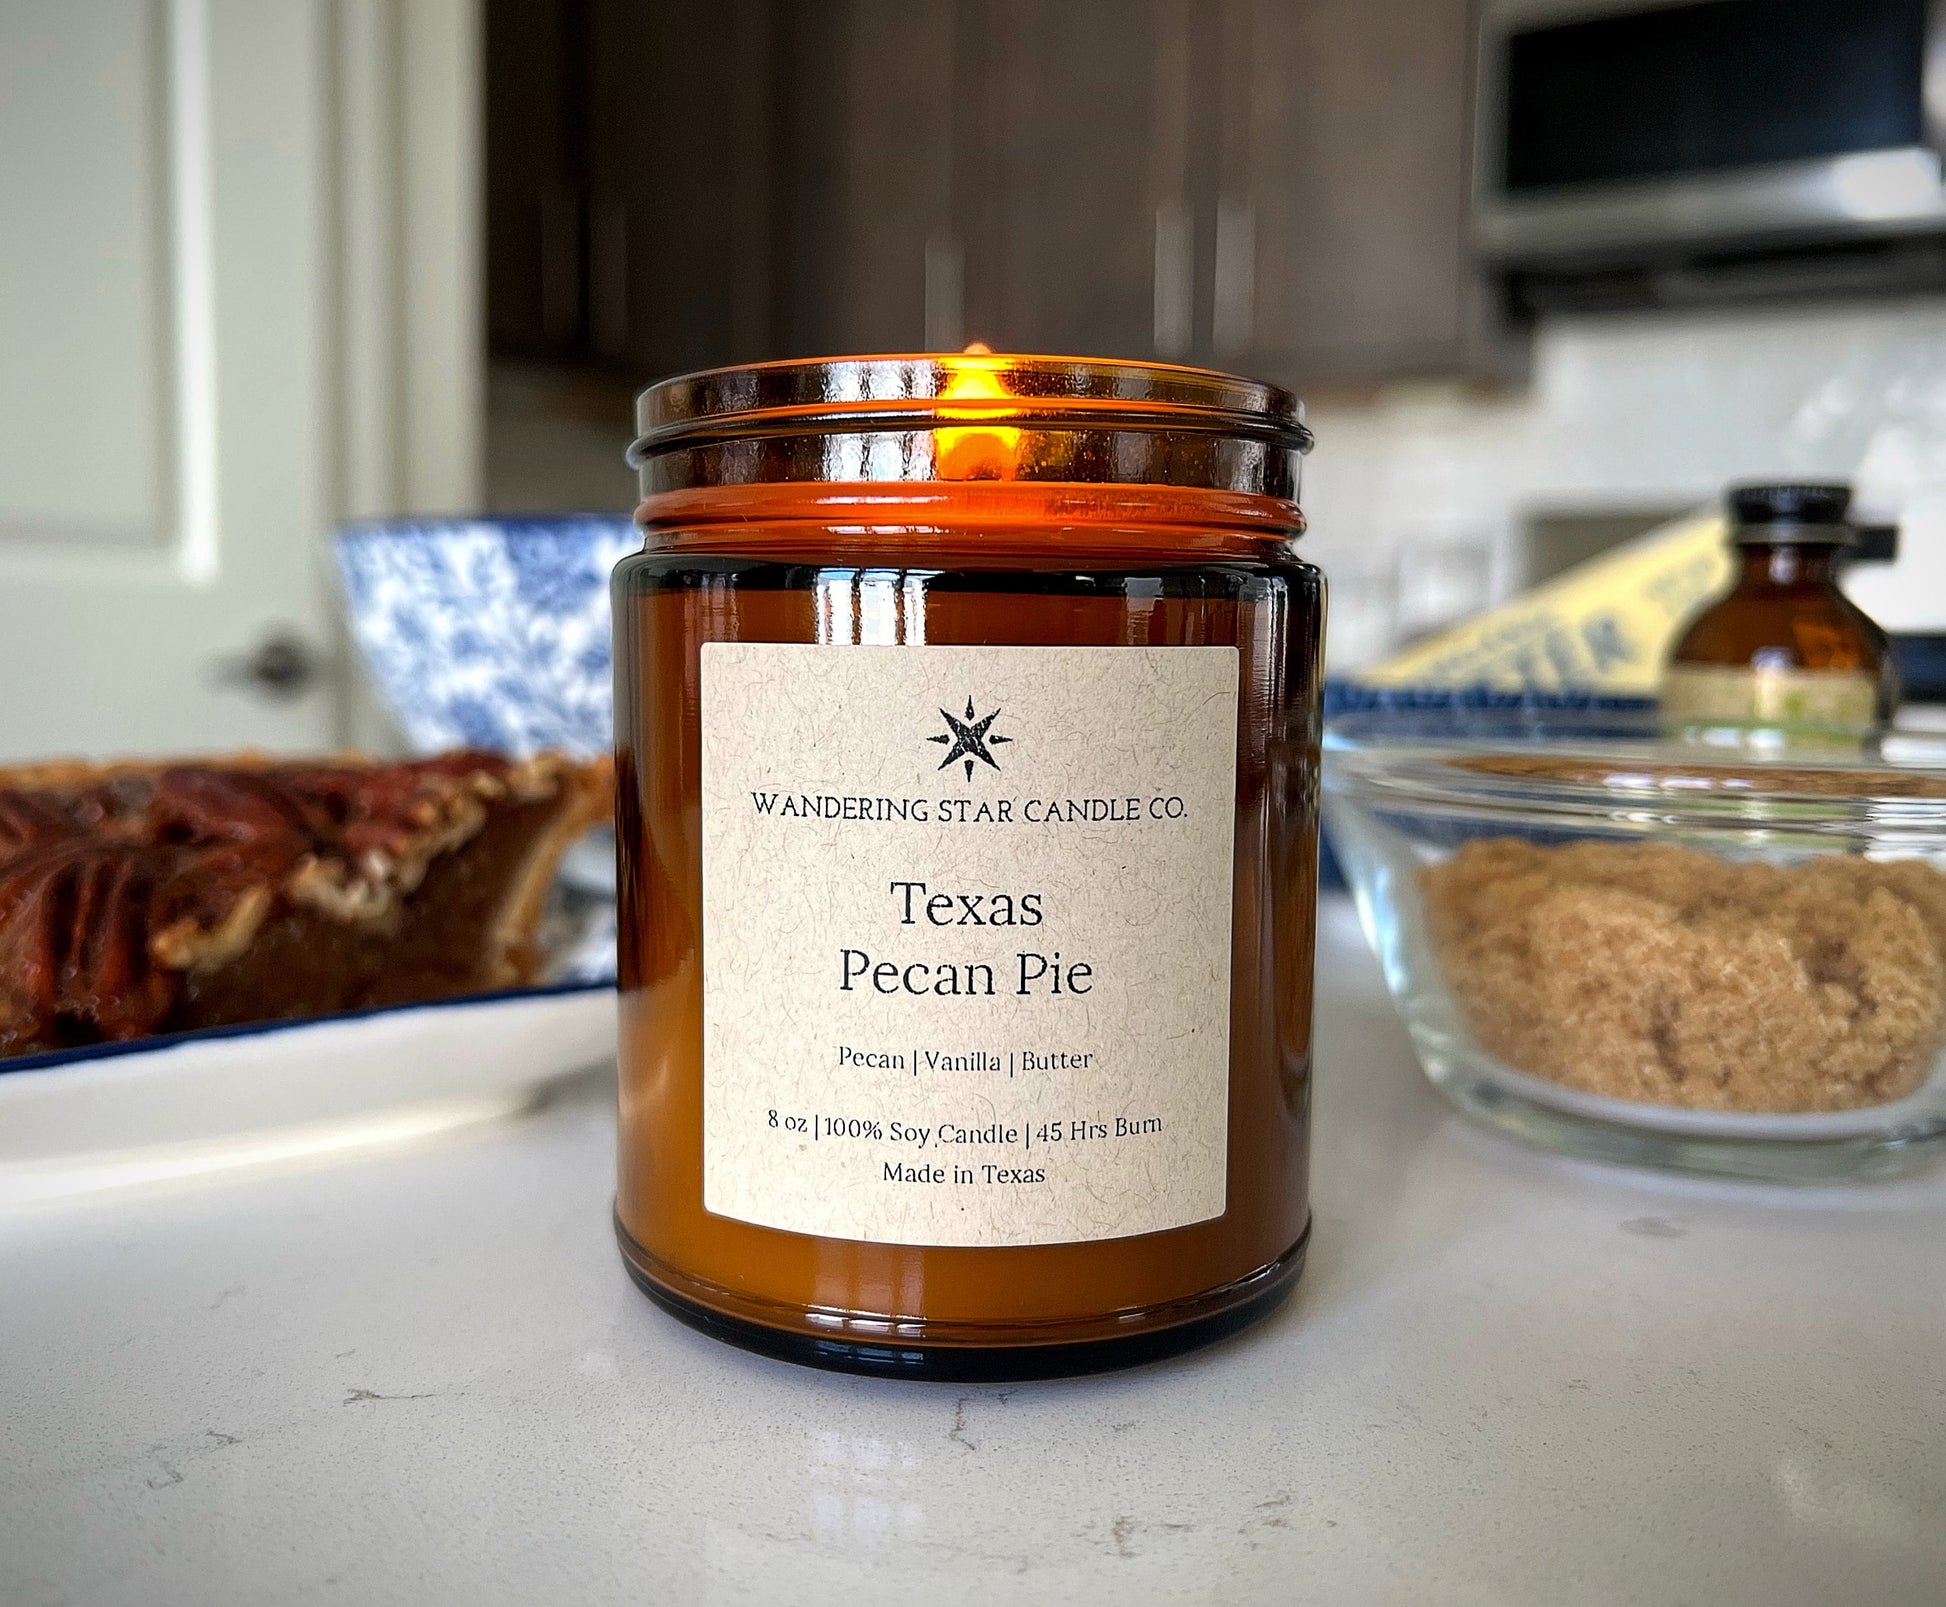 A lit amber jar candle in the scent of Texas Pecan Pie